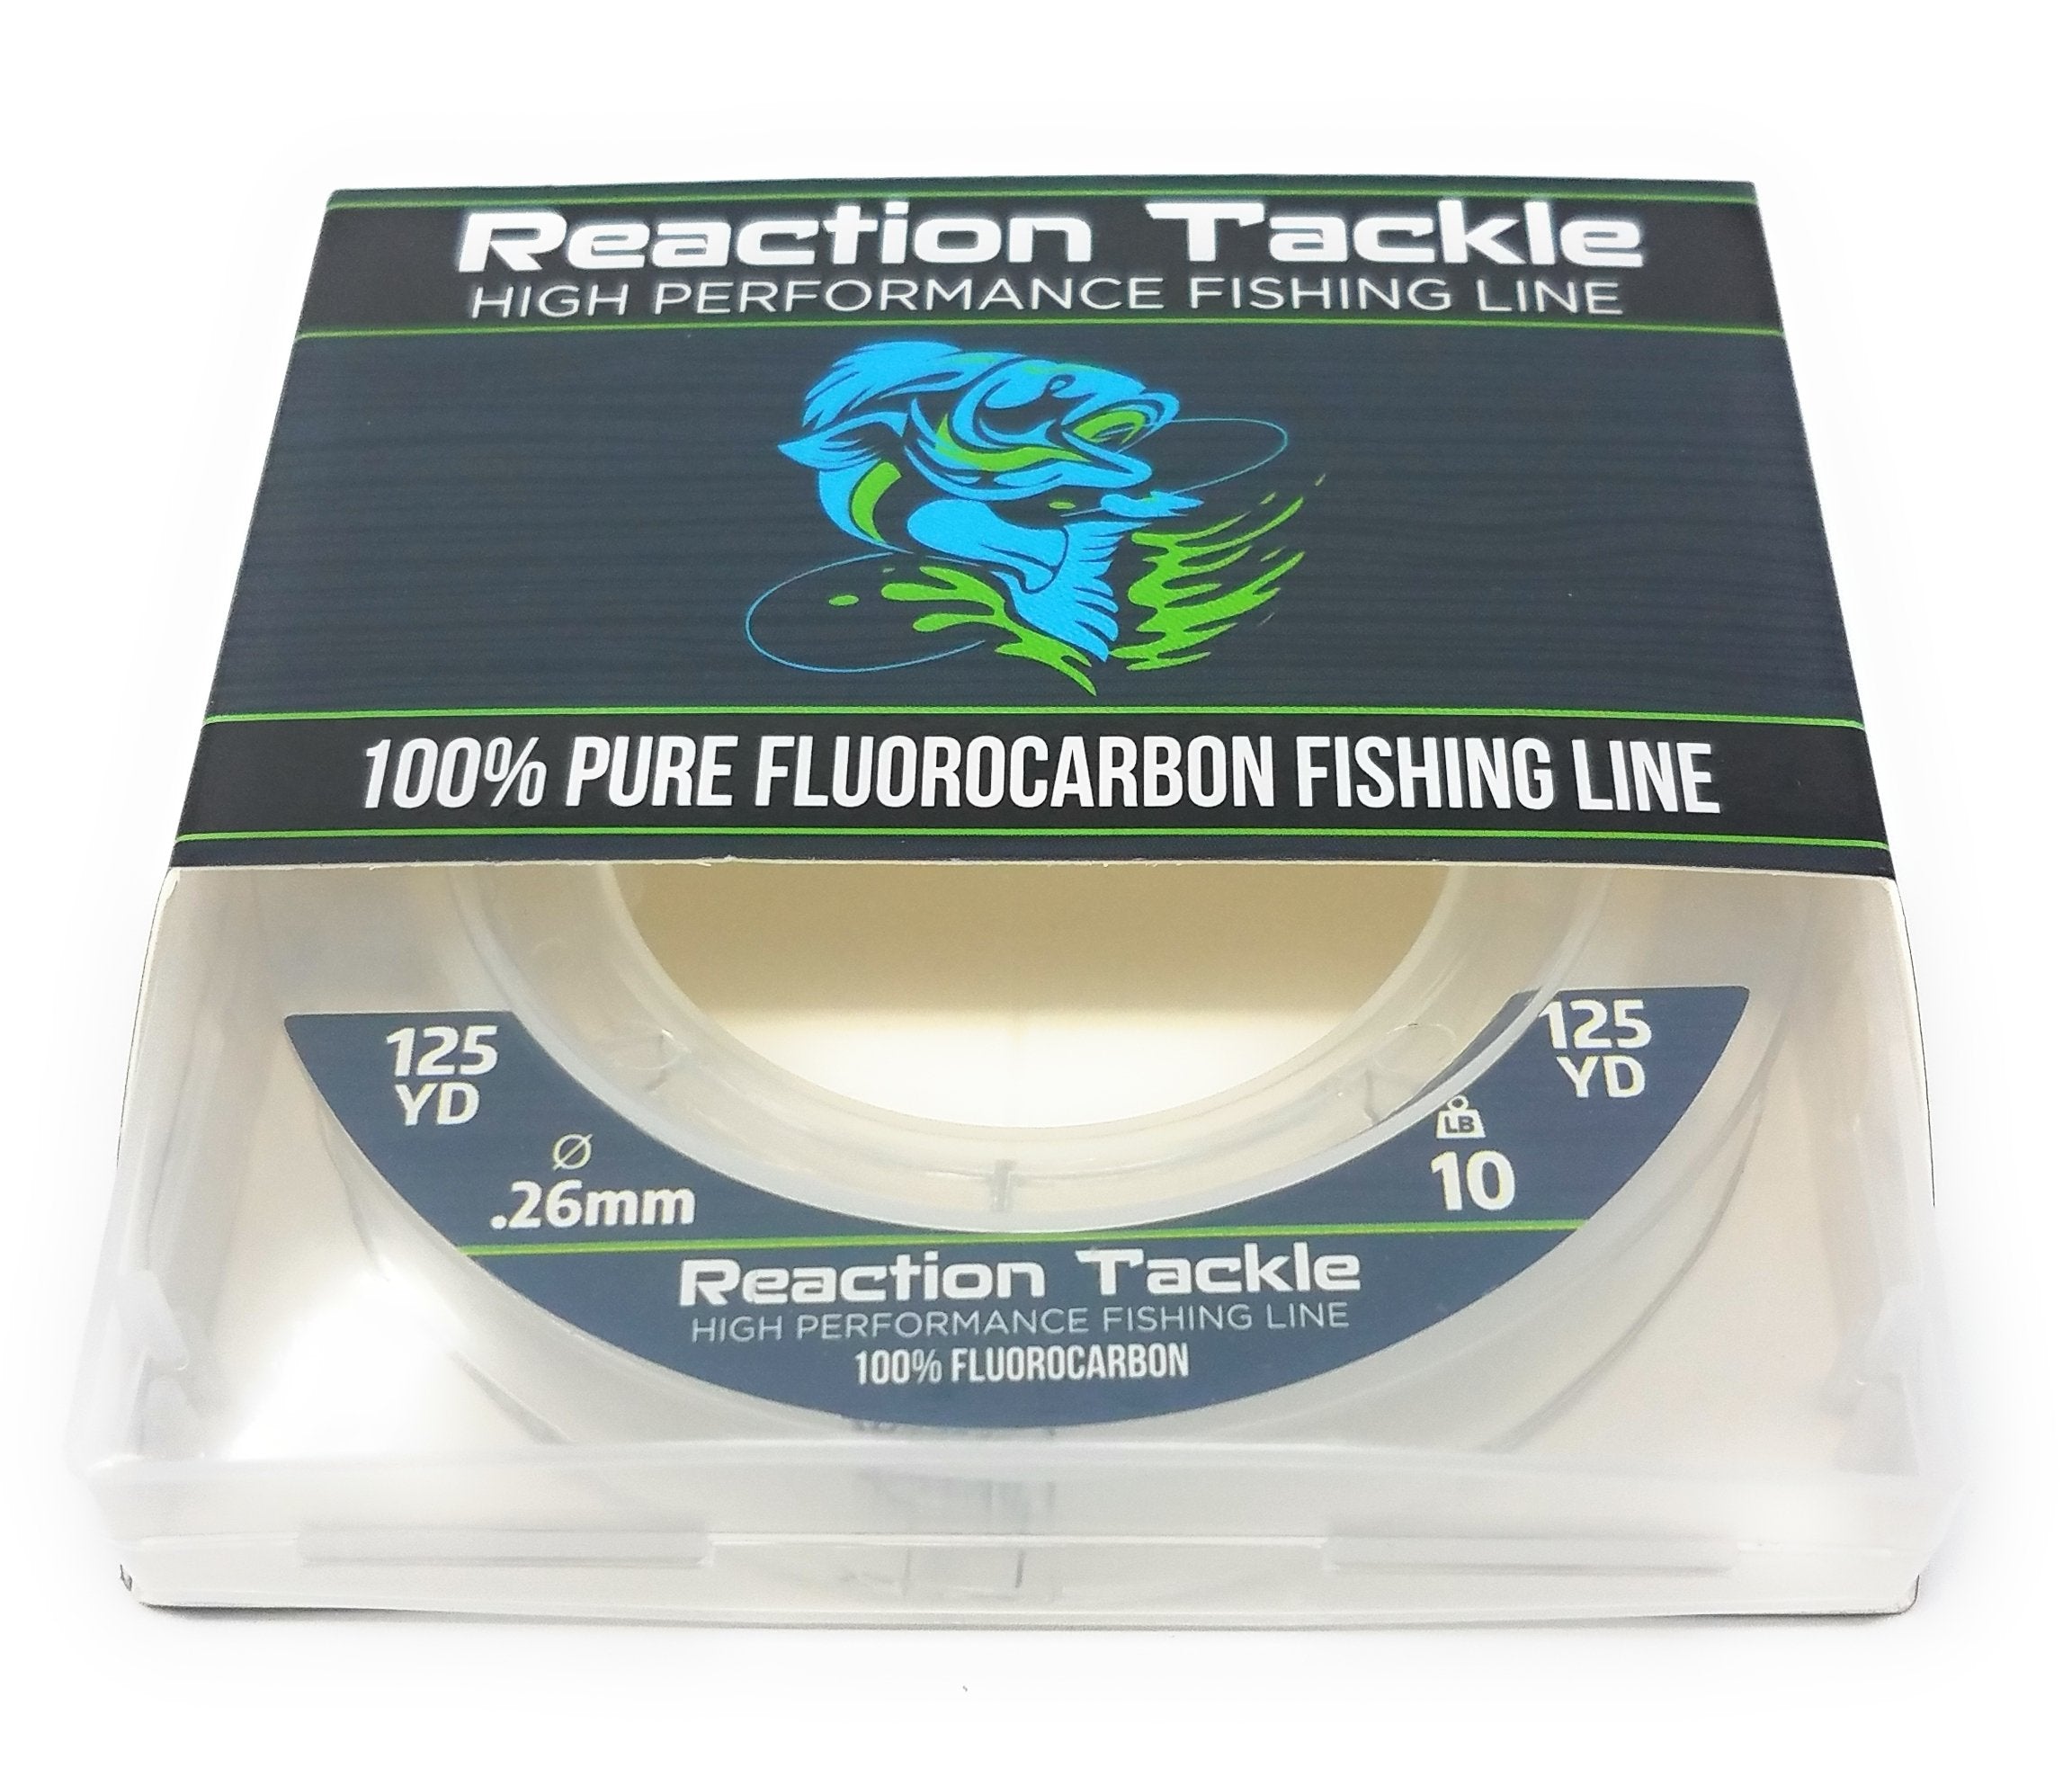 P-Line Soft Fluorocarbon Fishing Line 250Yd 25Lb, Clear